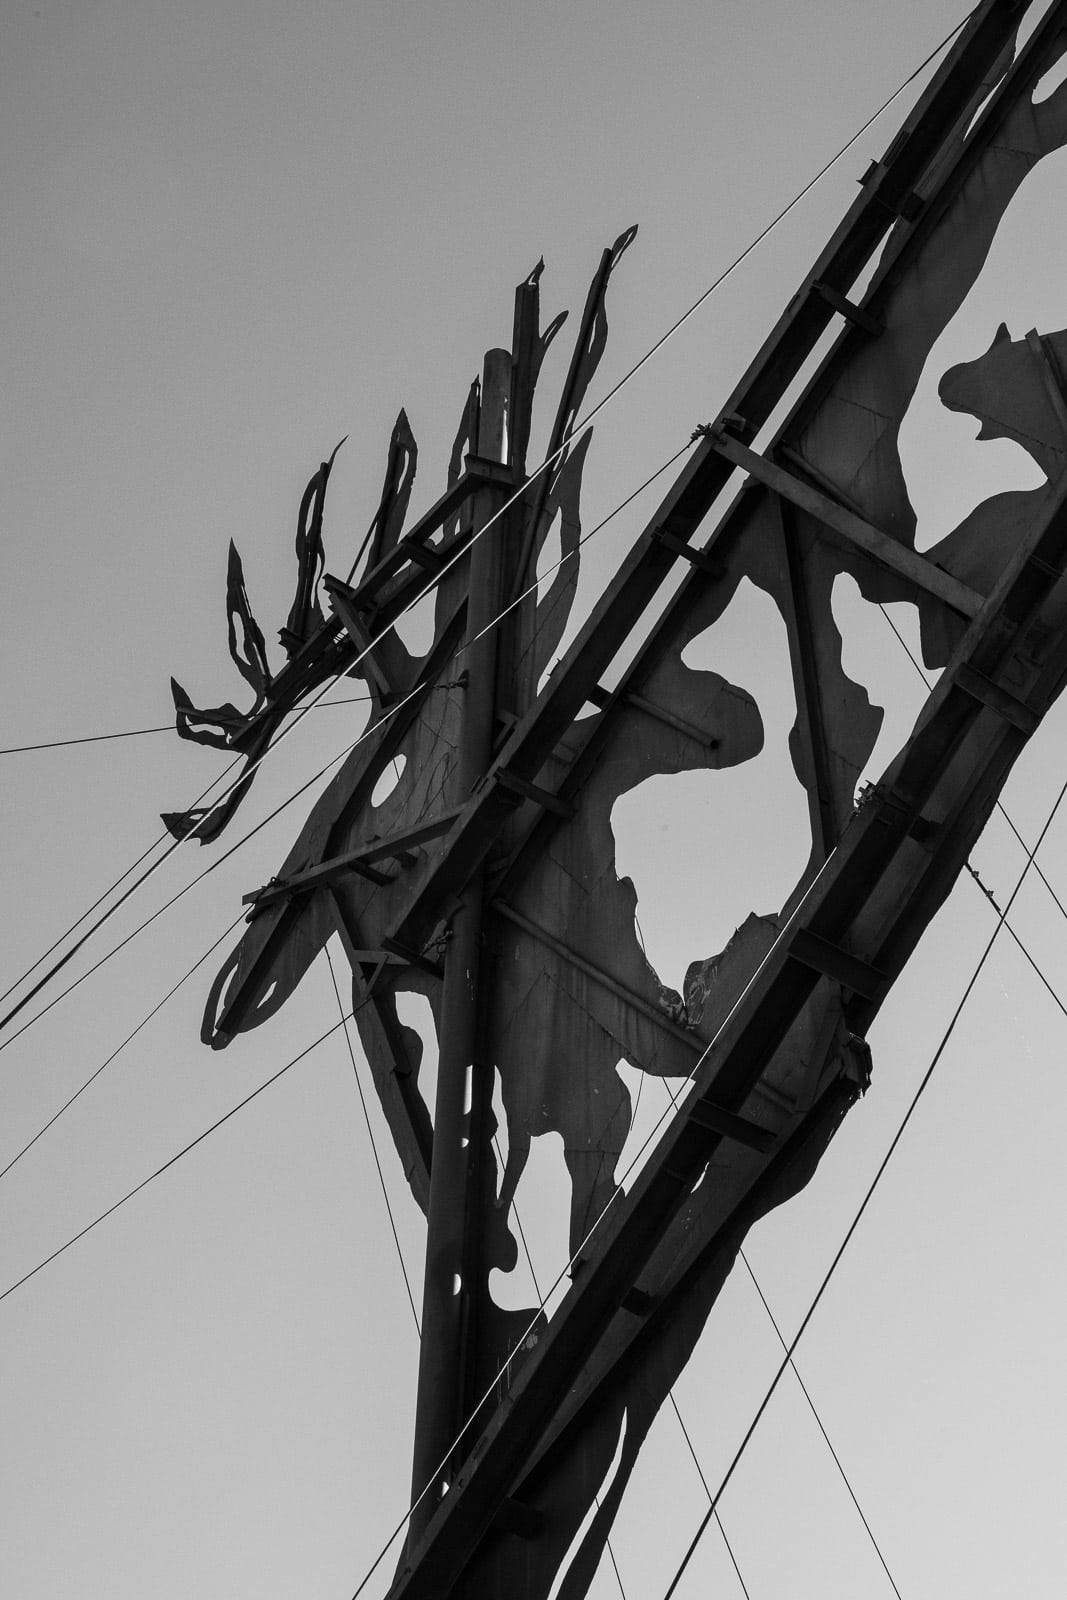 This is a detail of the construction of the sculpture by Gary Greff, called Deer Crossing. It is located along the Enchanted Highway, between I-94 and Regent, North Dakota.